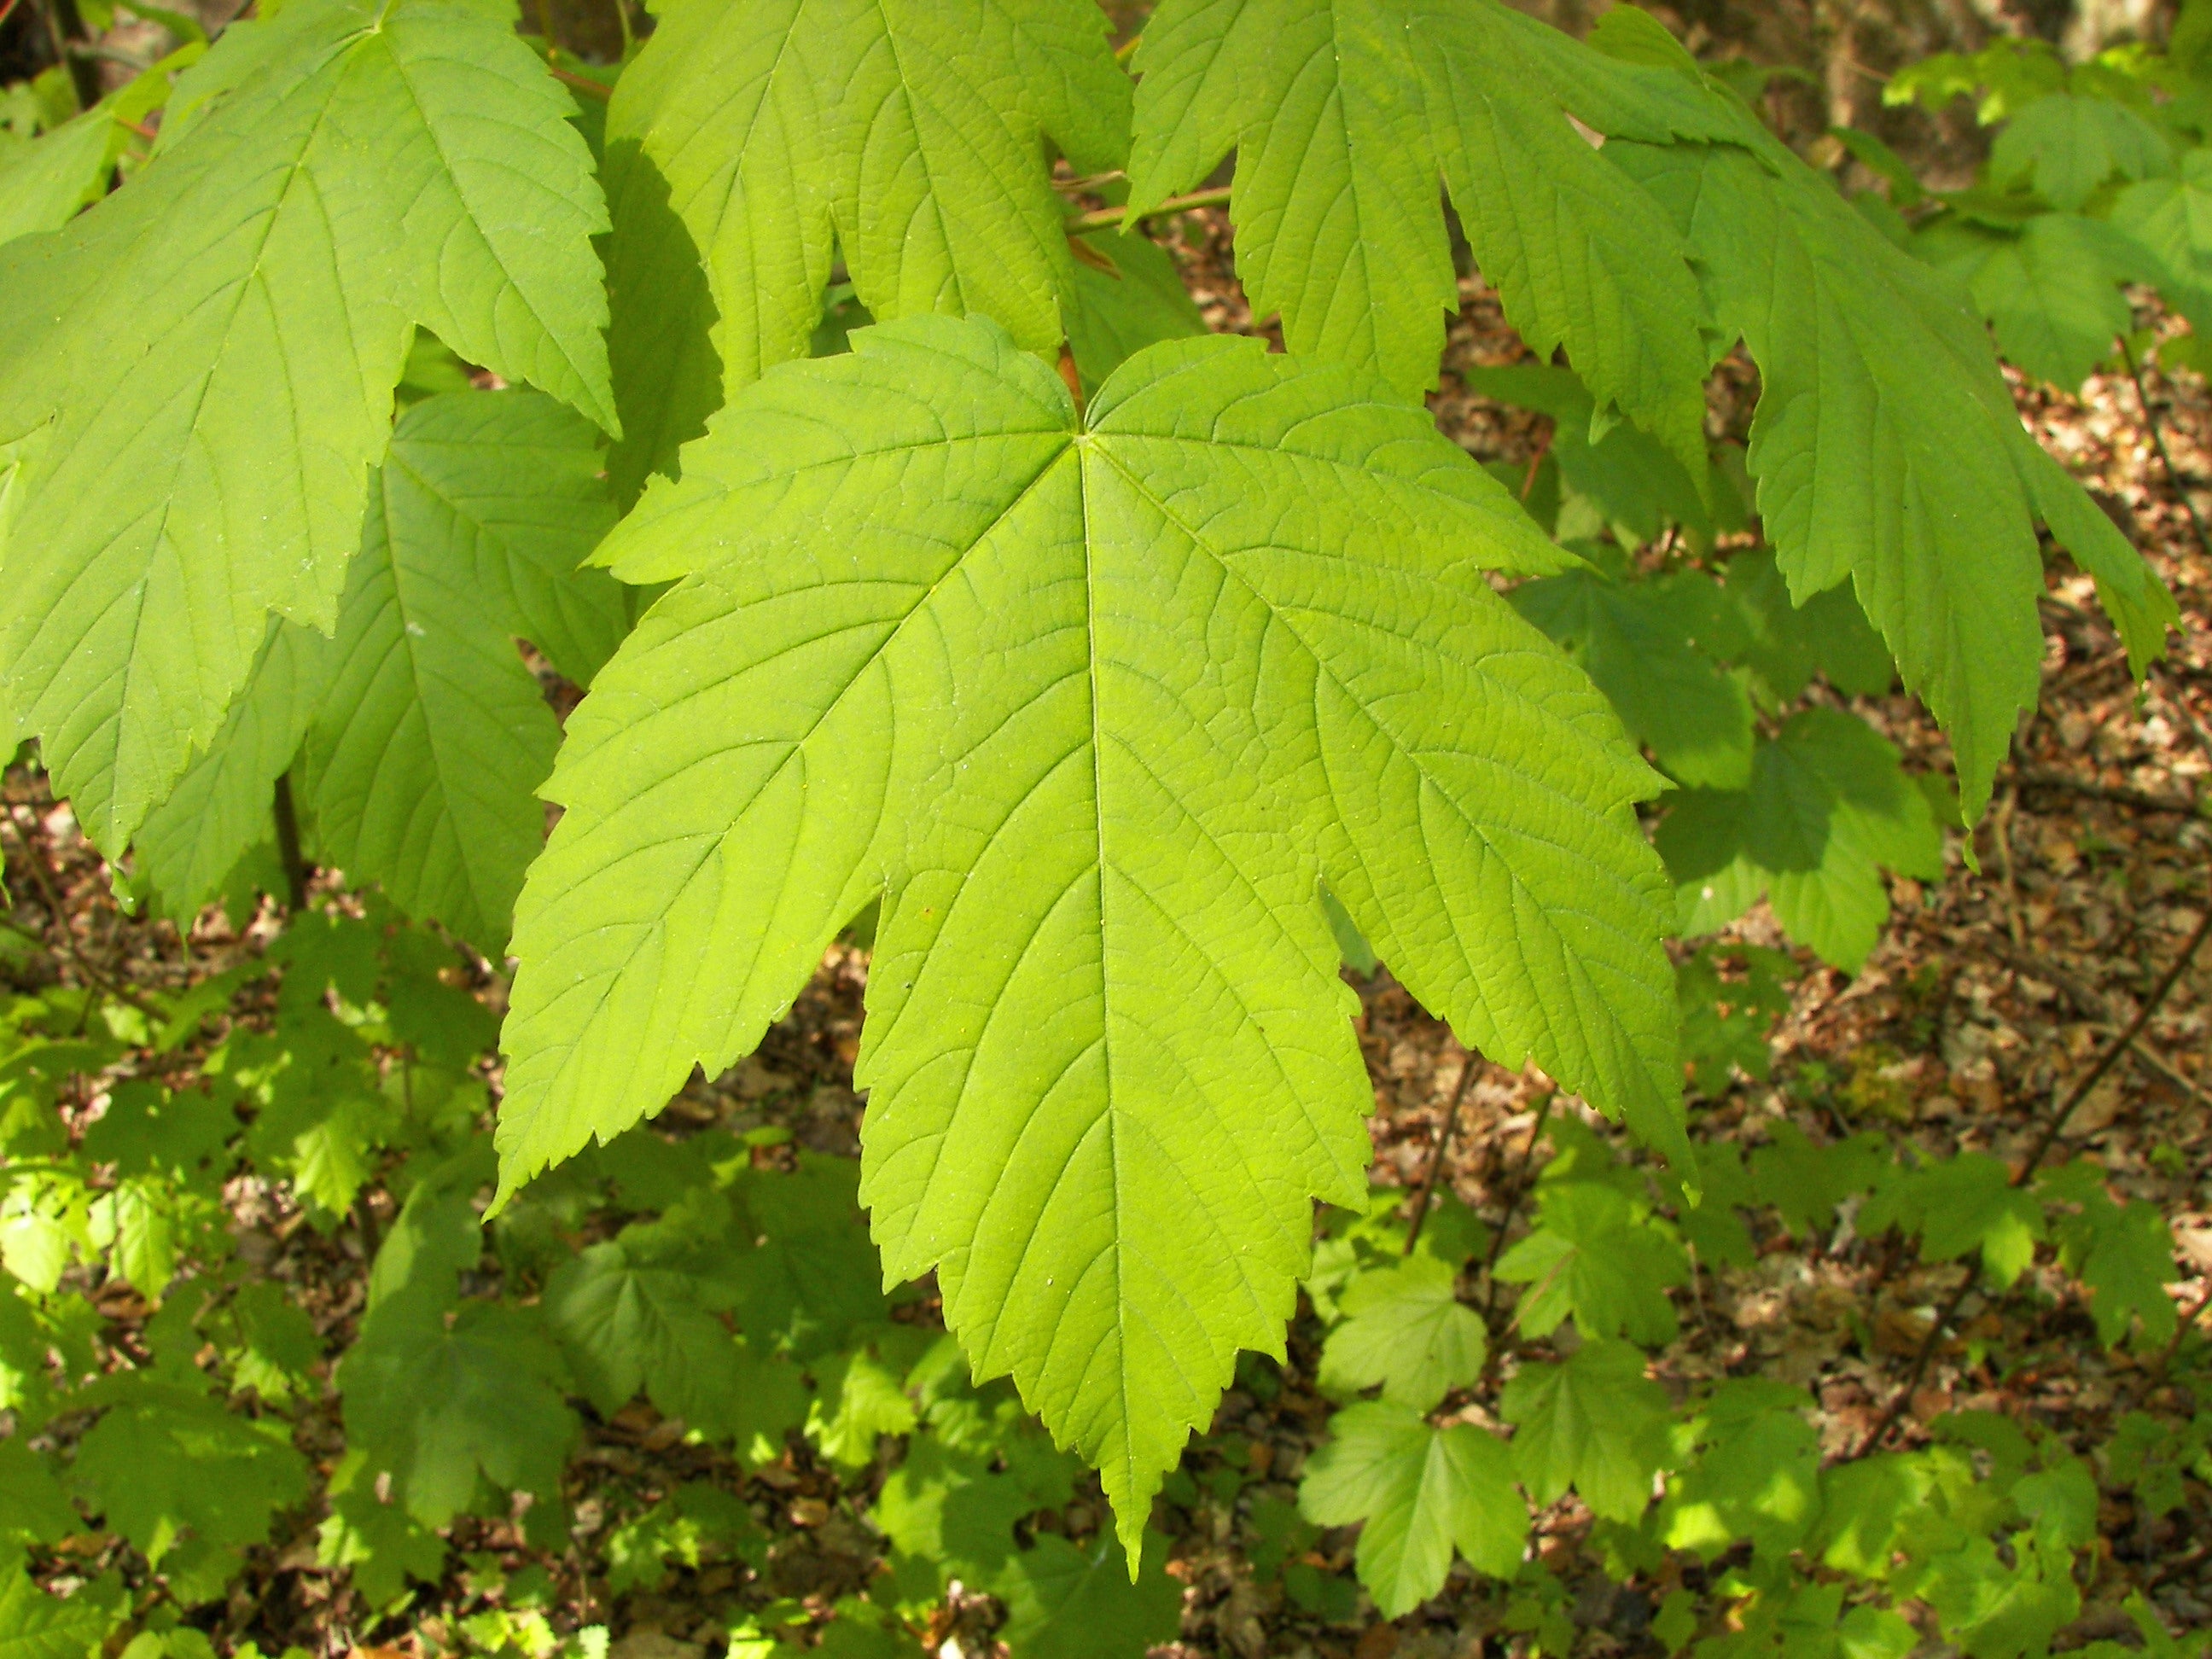 A photo of a green maple leaf in springtime